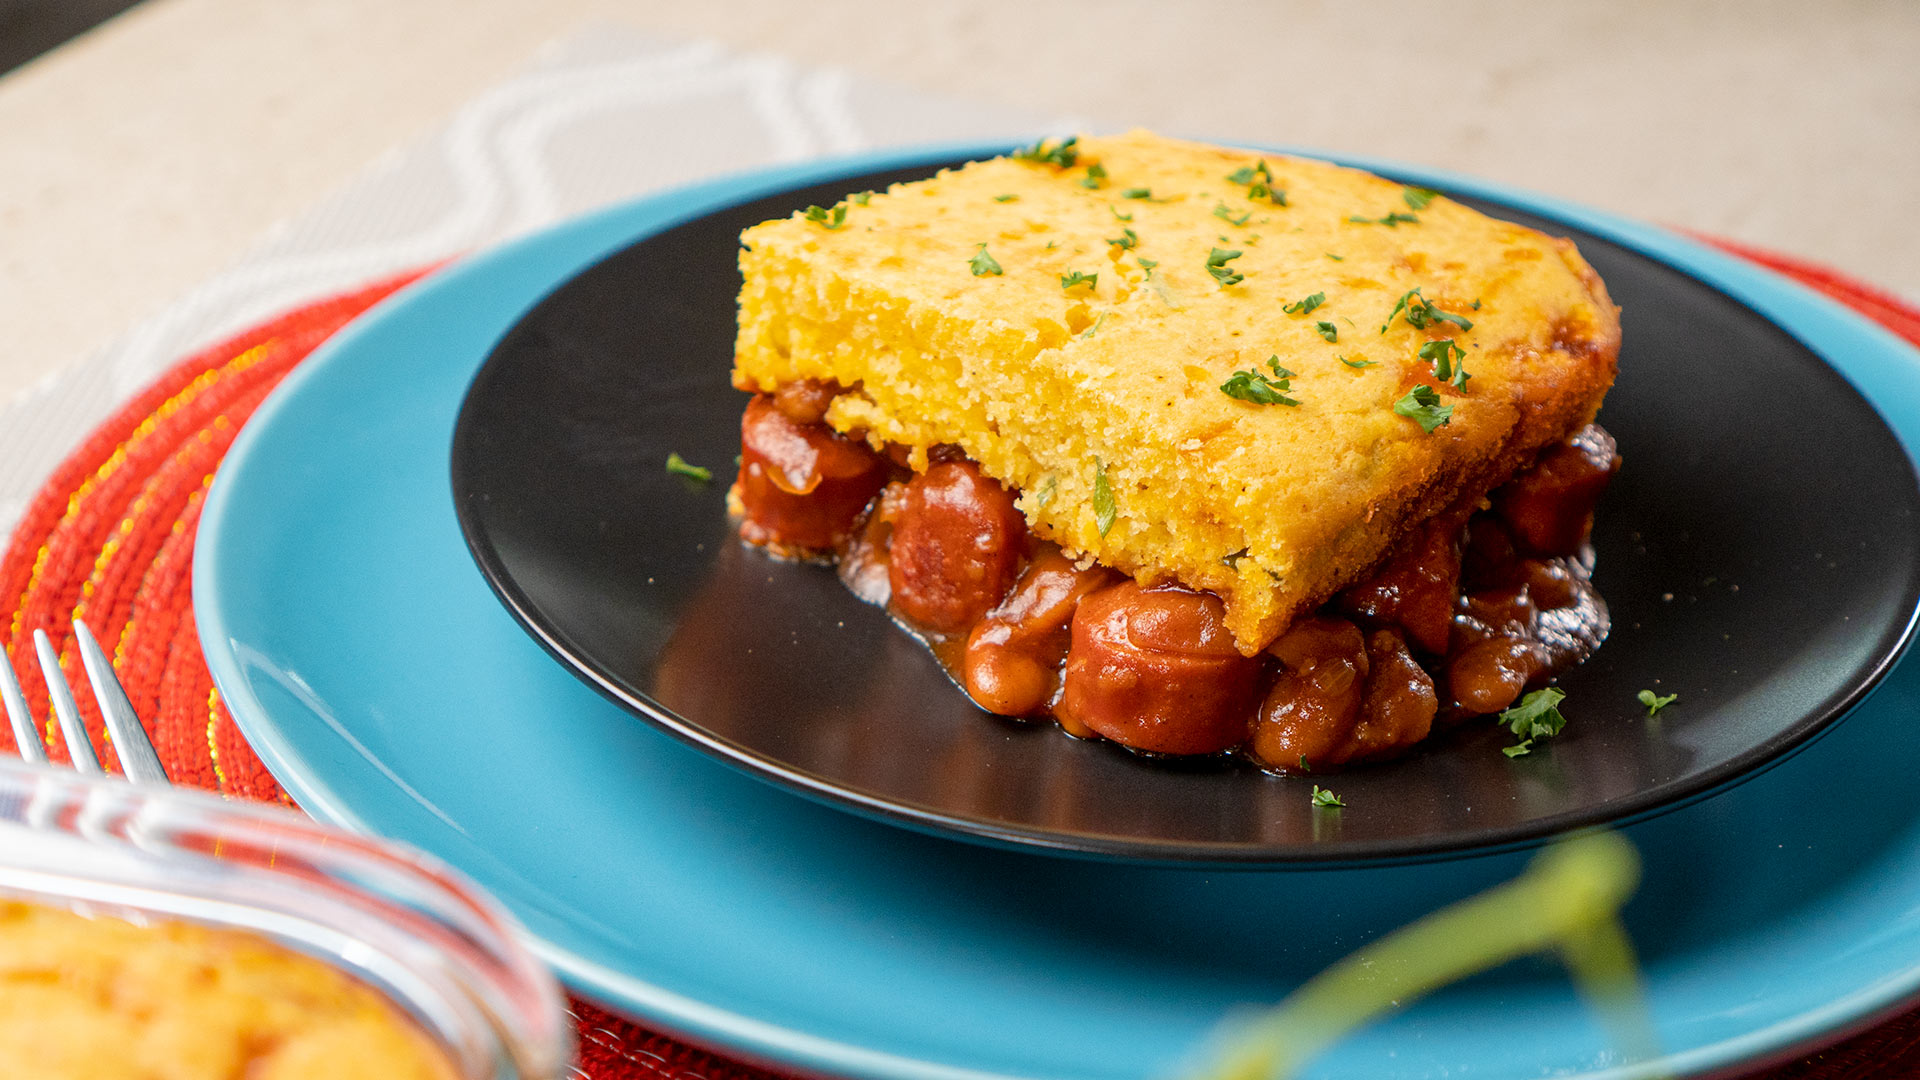 Baked Beans and Hot Dogs Casserole Recipe - Recipes.net